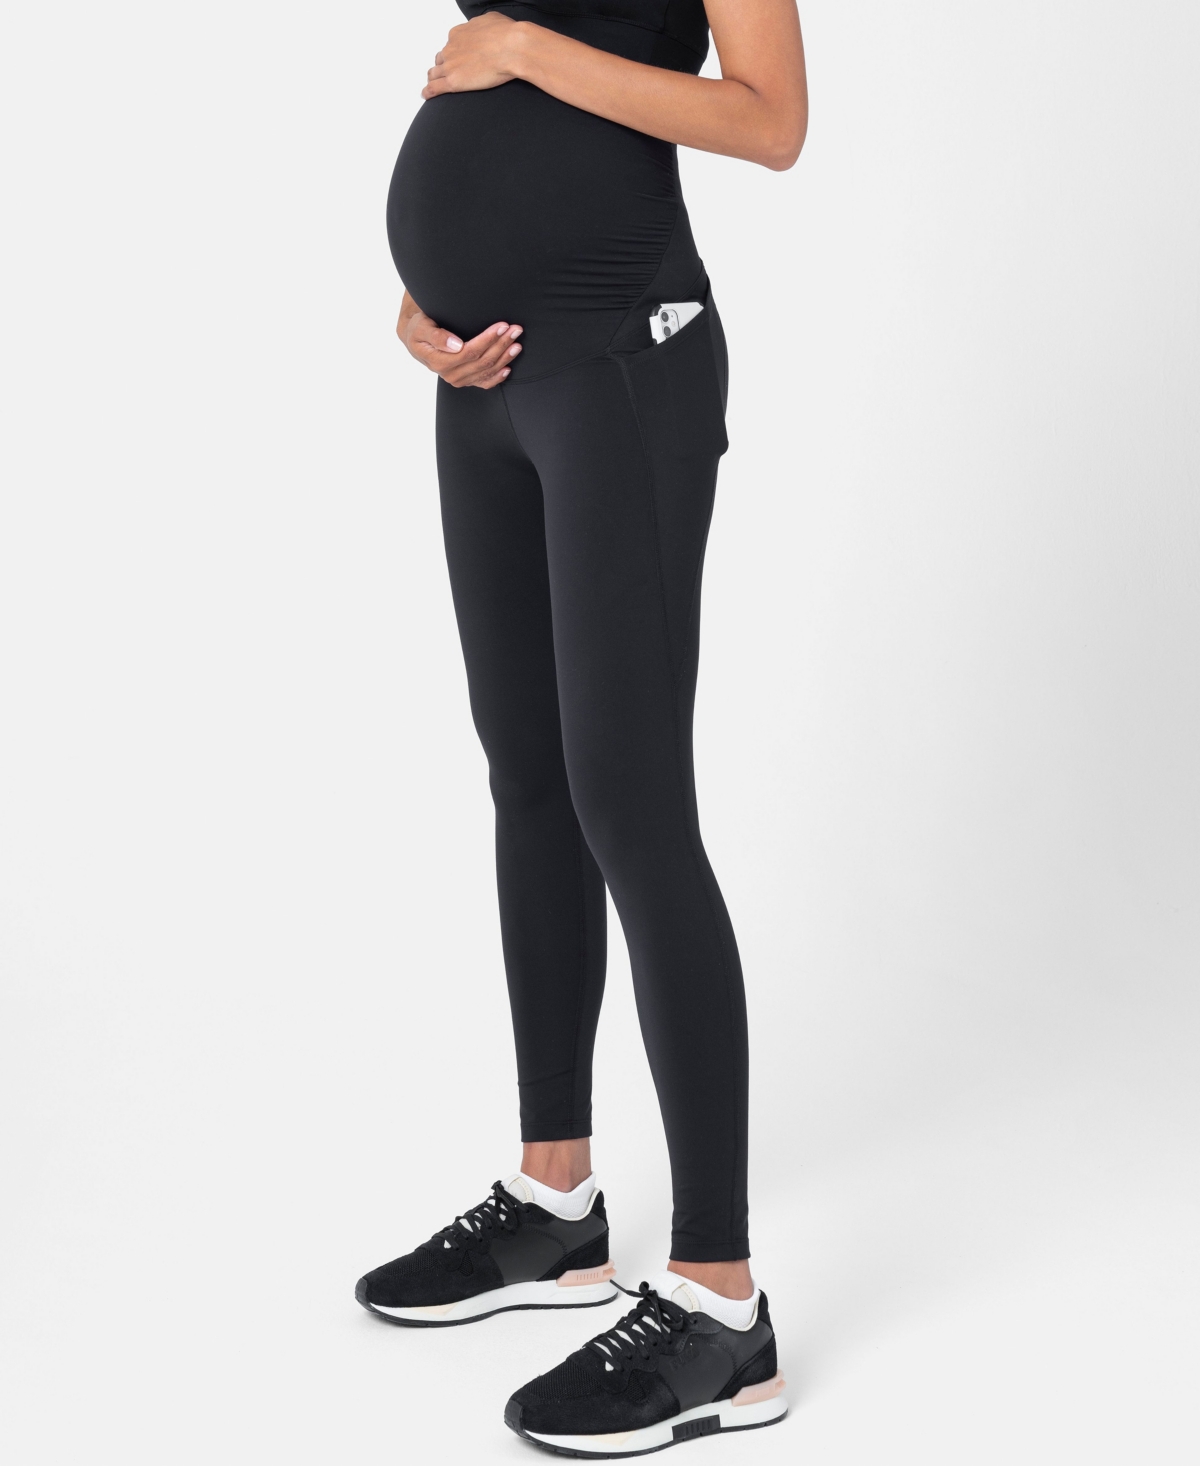 Shop Seraphine Women's Active Support Soft-touch Sage Maternity Leggings In Black